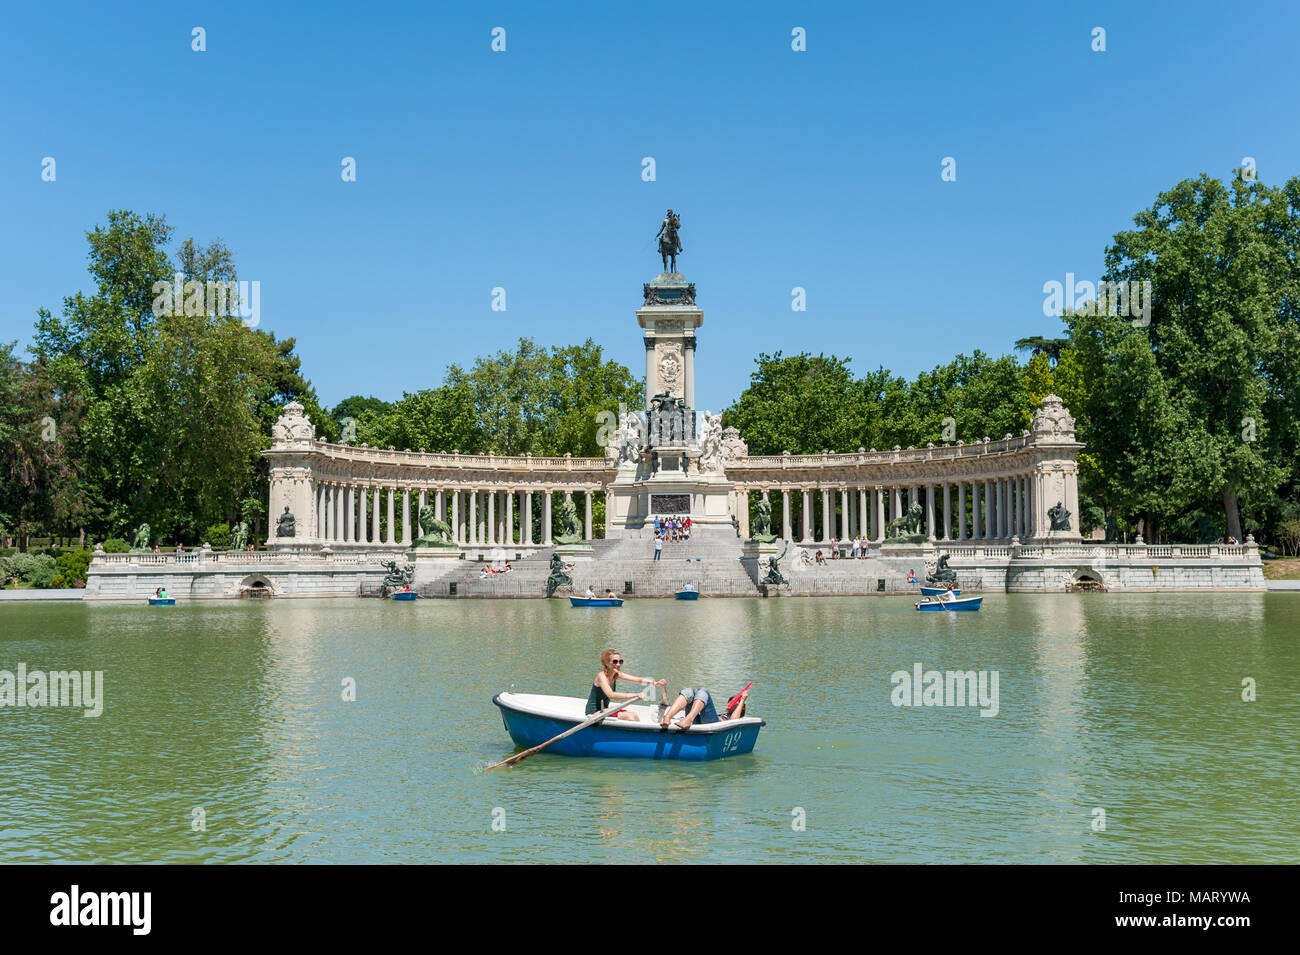 Young women on the boating lake in Buen Retiro park, Madrid, Spain Stock Photo